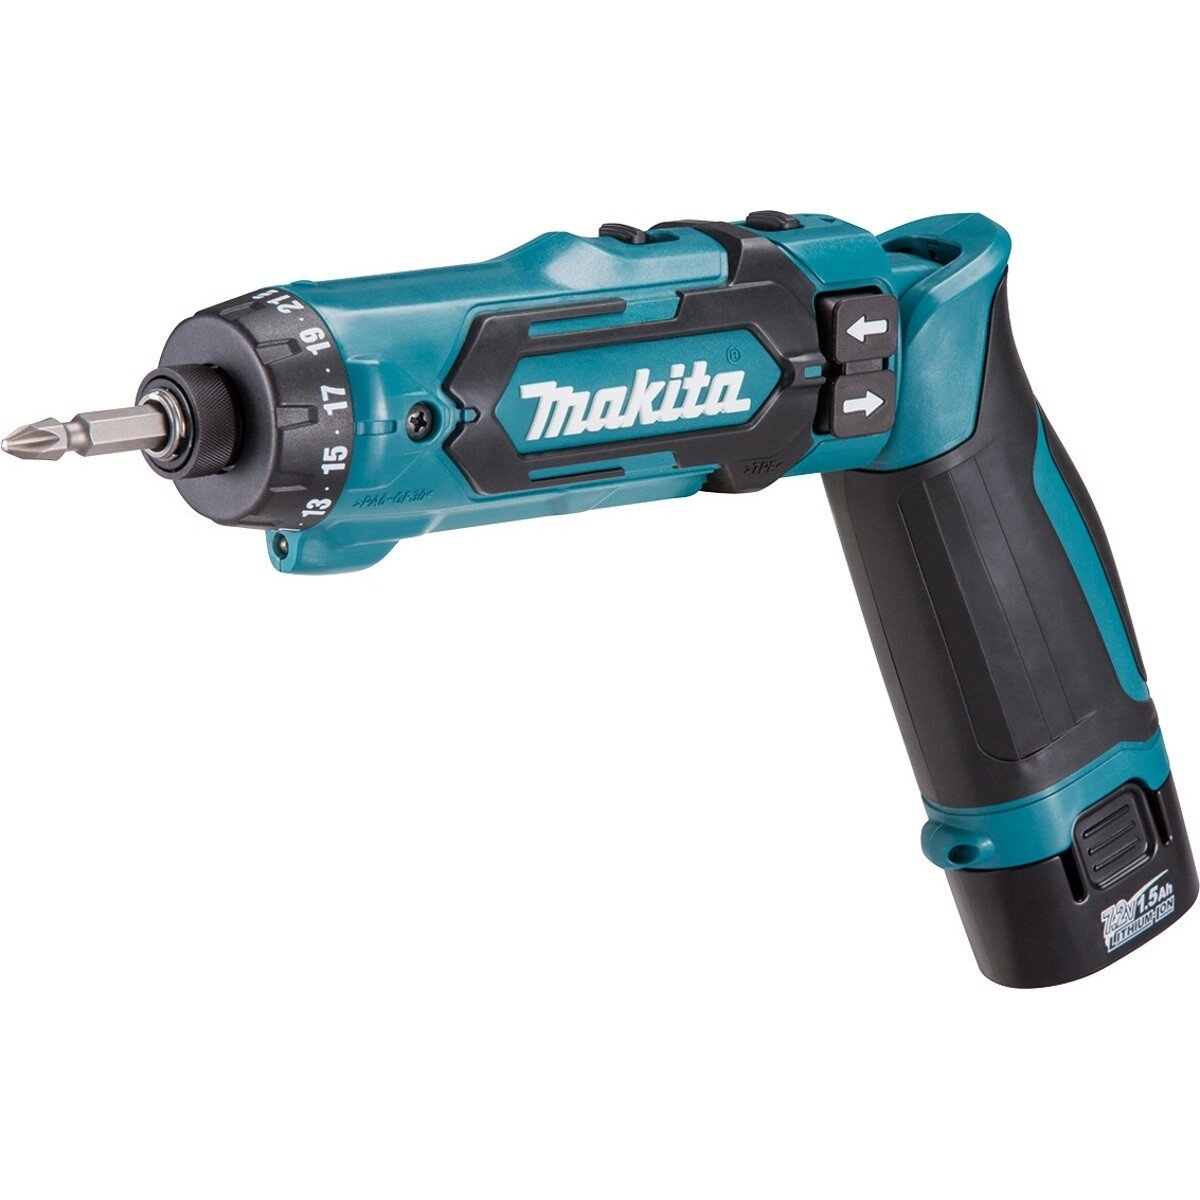 Makita DF012DSE 7.2V Pencil Drill / Driver with 2x 1.5Ah Batteries in Case